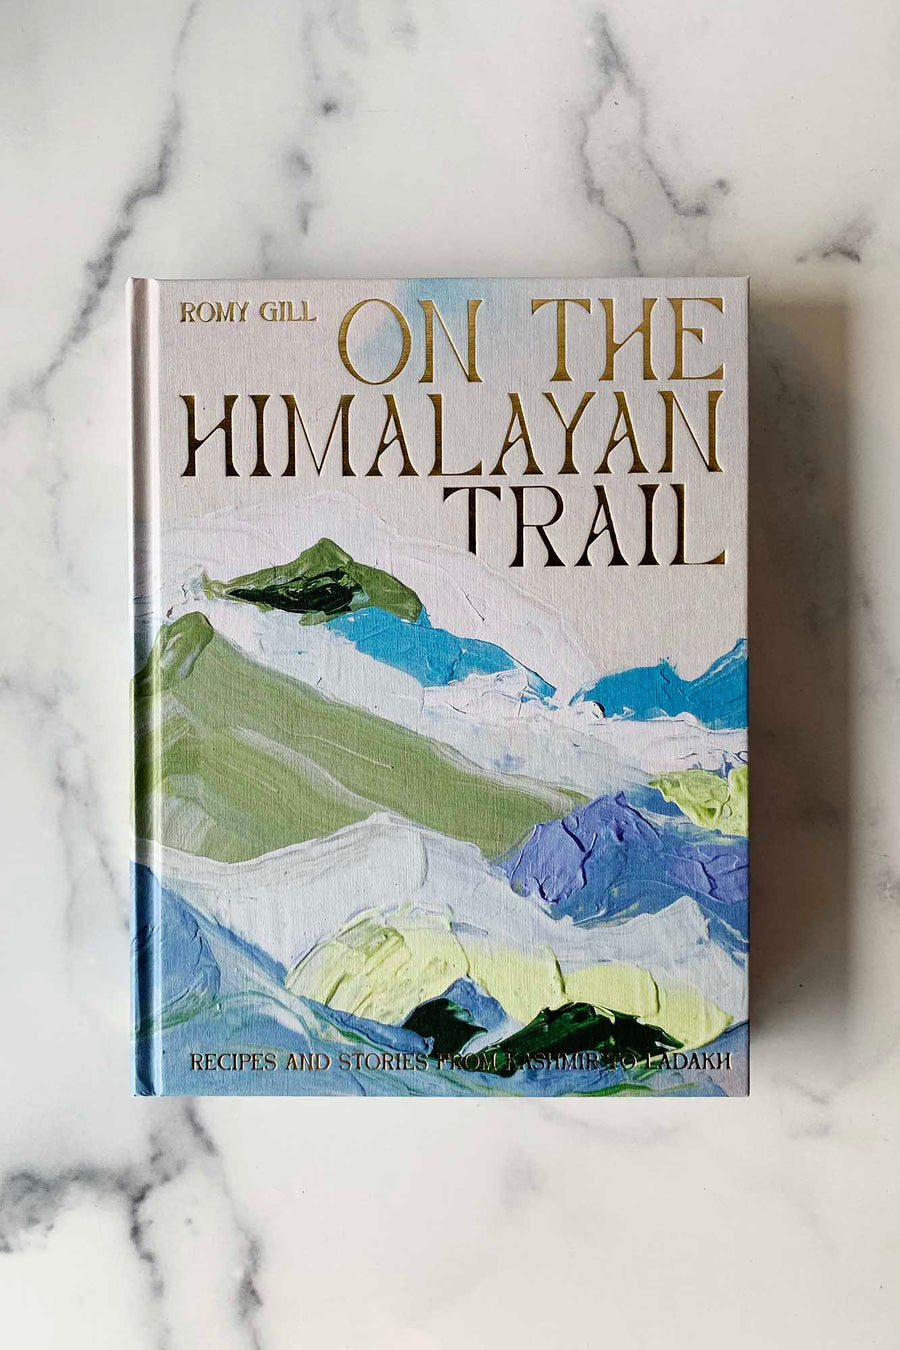 On the Himalayan Trail